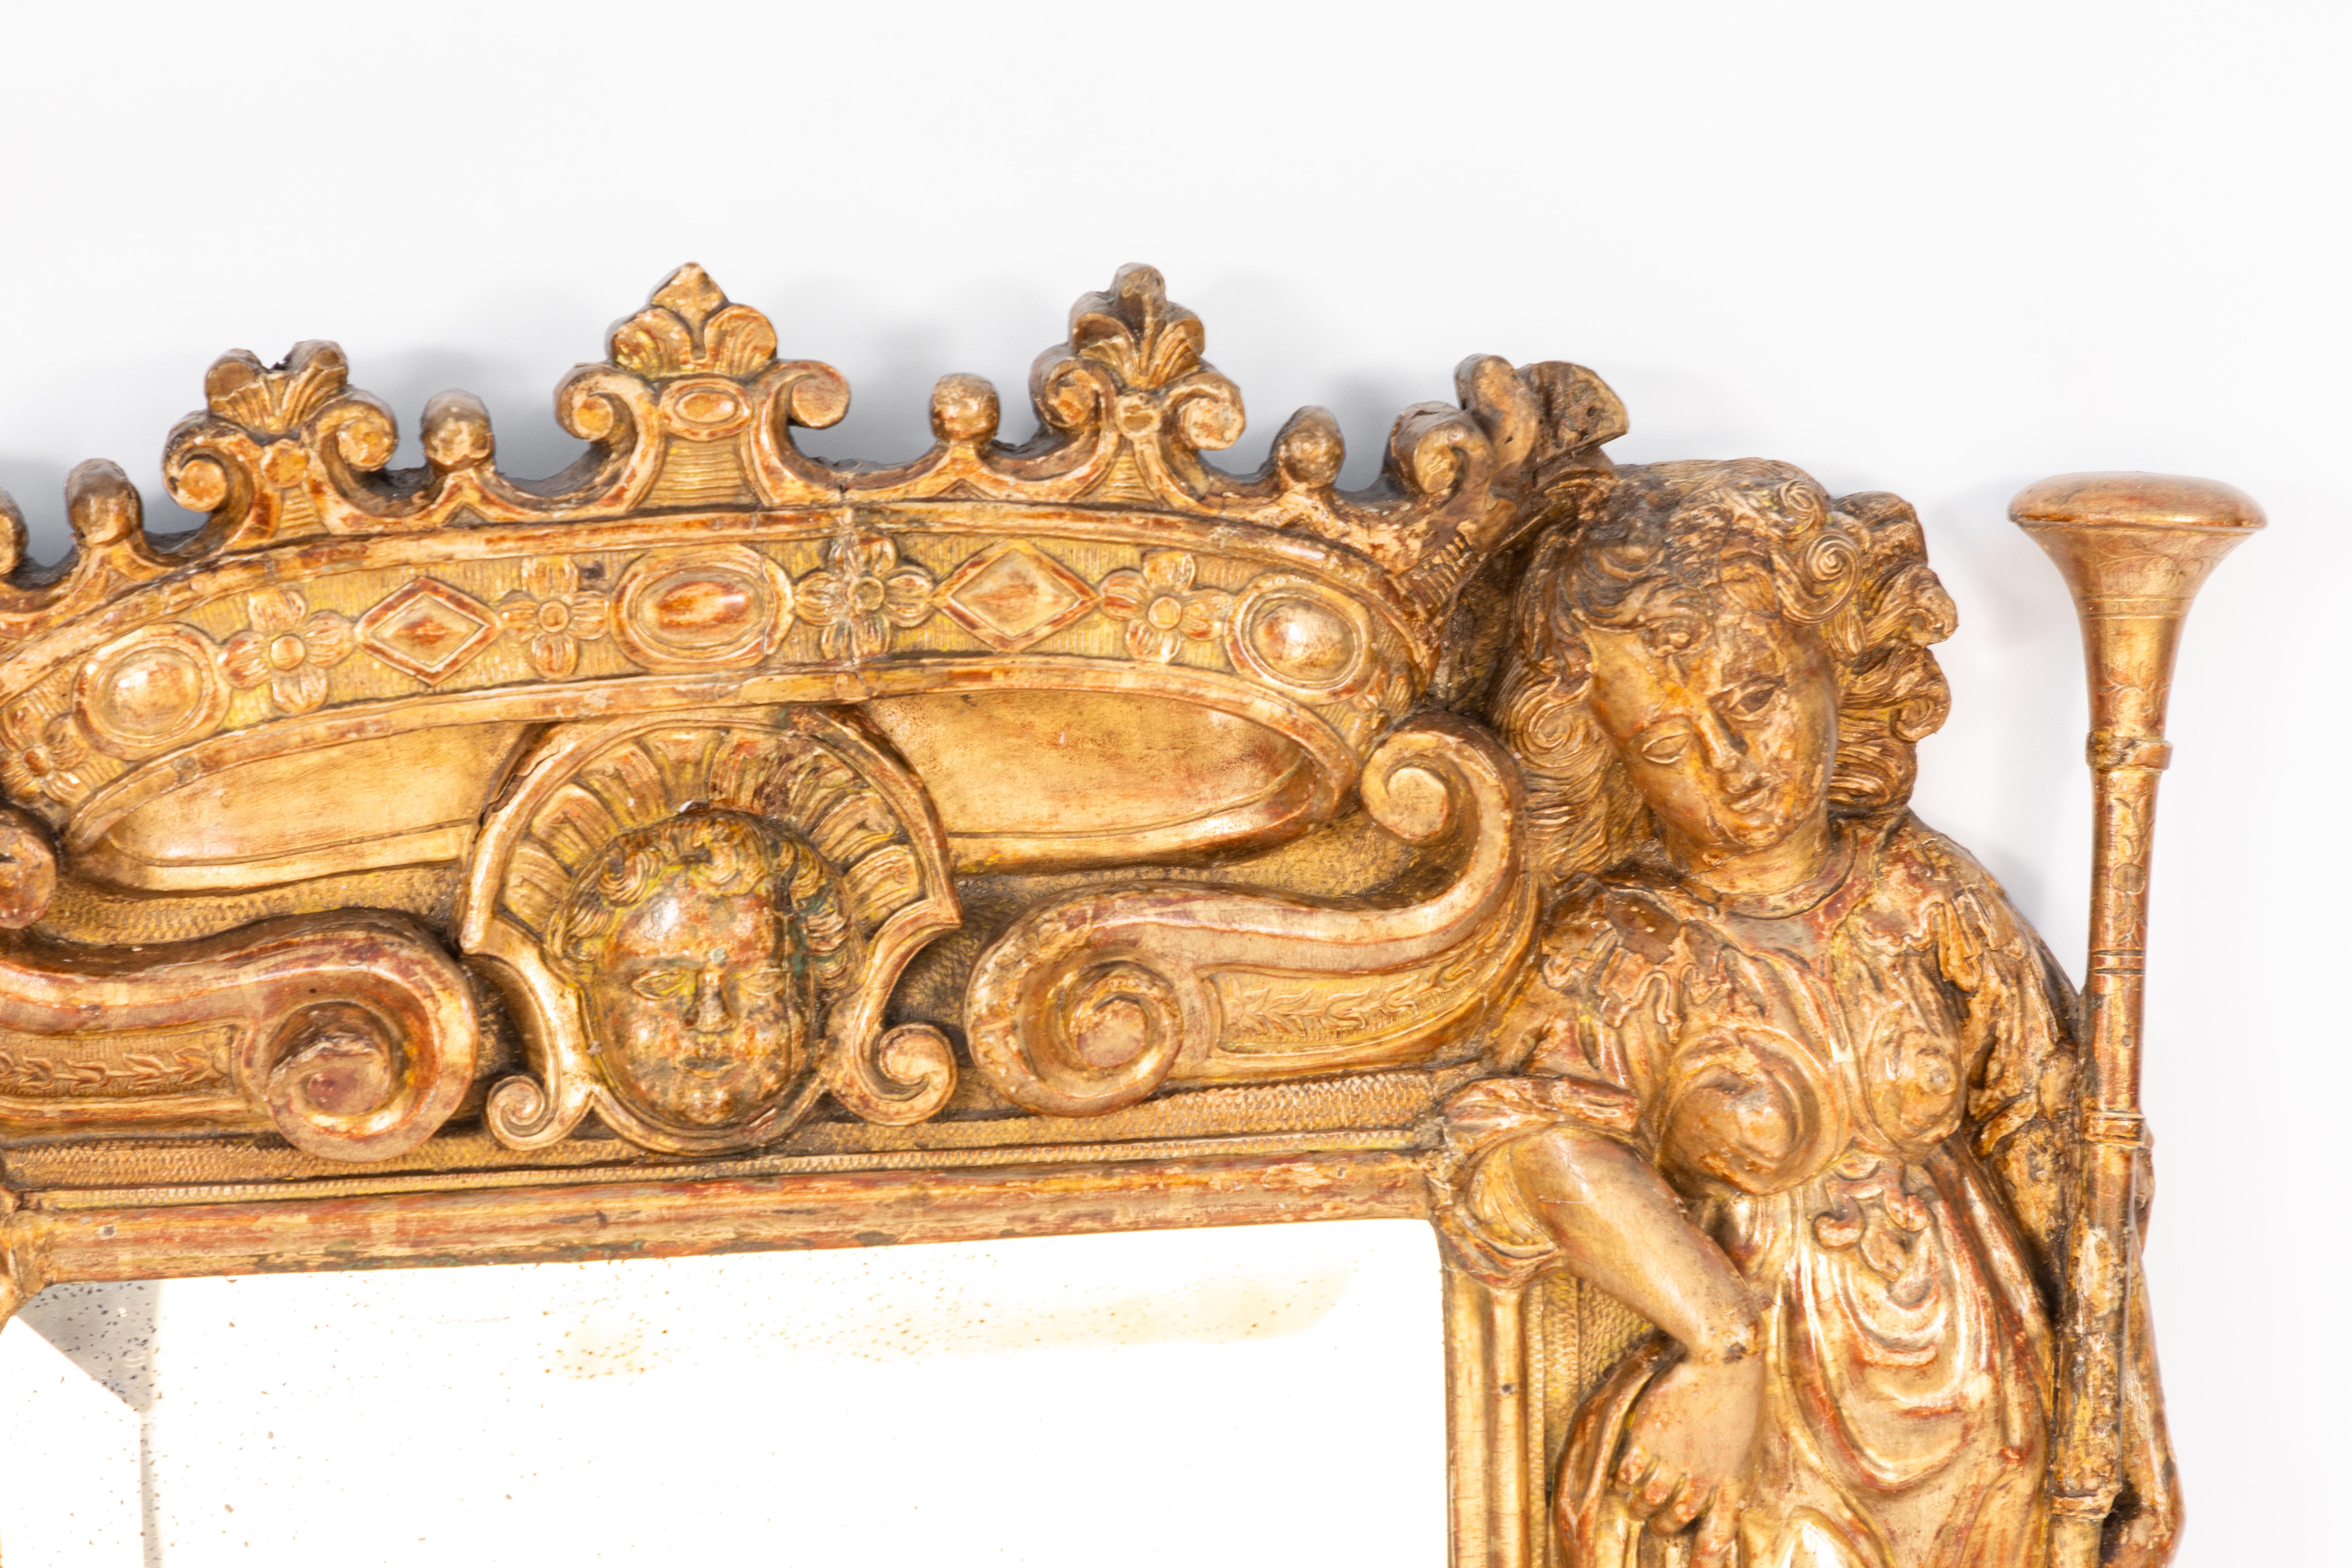 Early 18th century Italian giltwood mirror with finely carved details throughout. Cherub and crown motif. Original gilt finish. Beautiful patina.